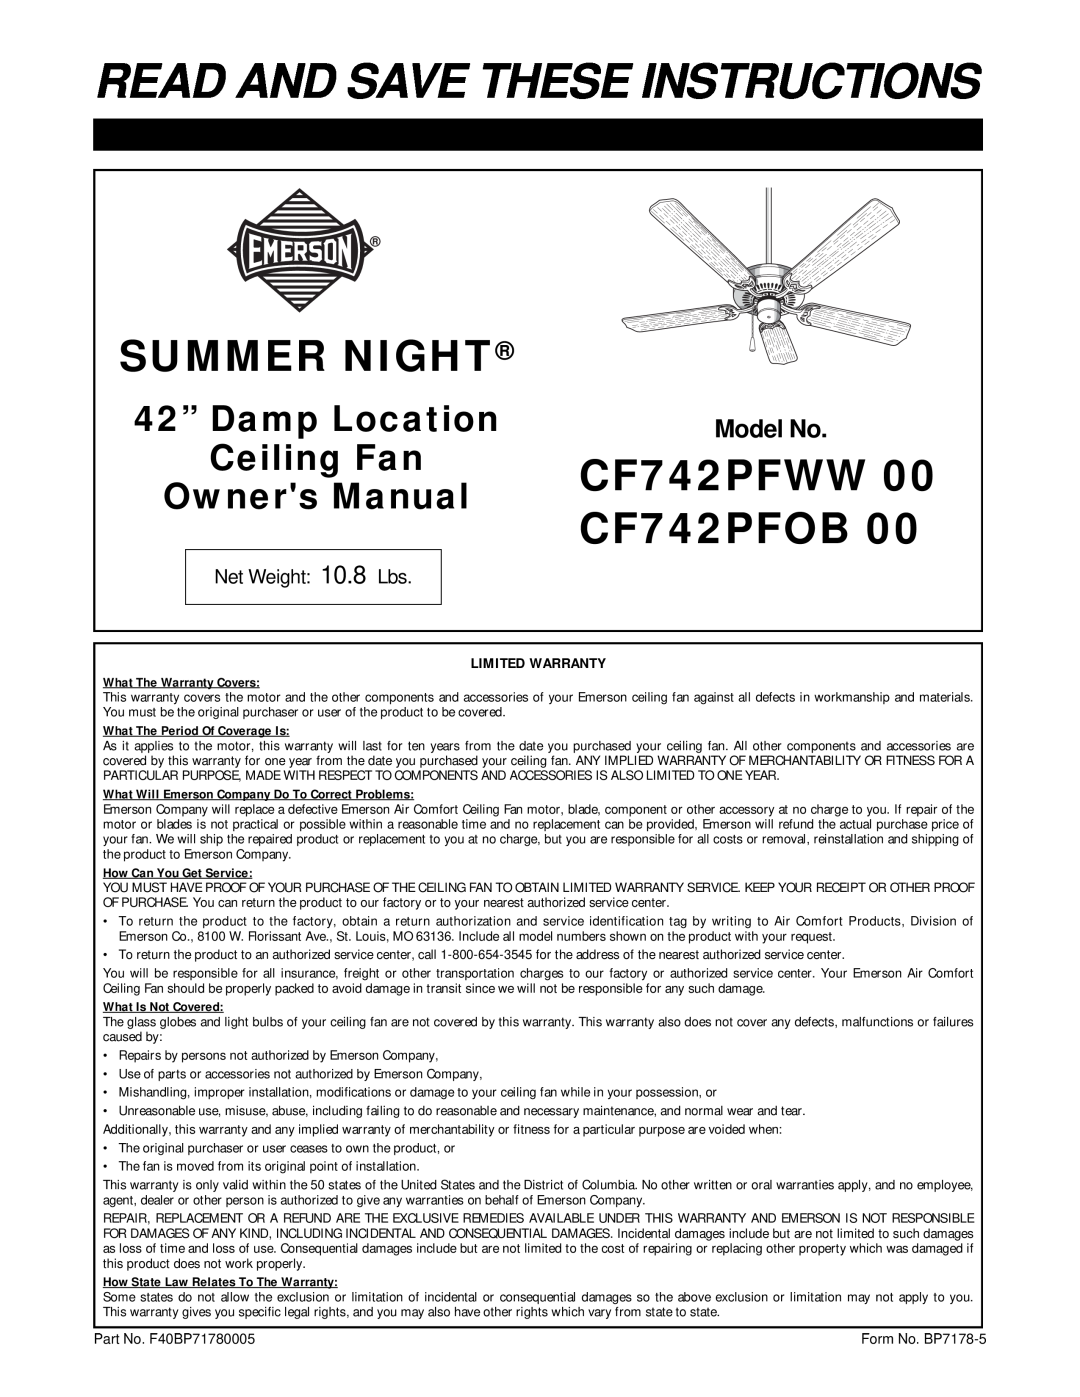 Emerson CF742PFWW warranty Model No, Read And Save These Instructions, Summer Night, CF742PFOB, 42” Damp Location 